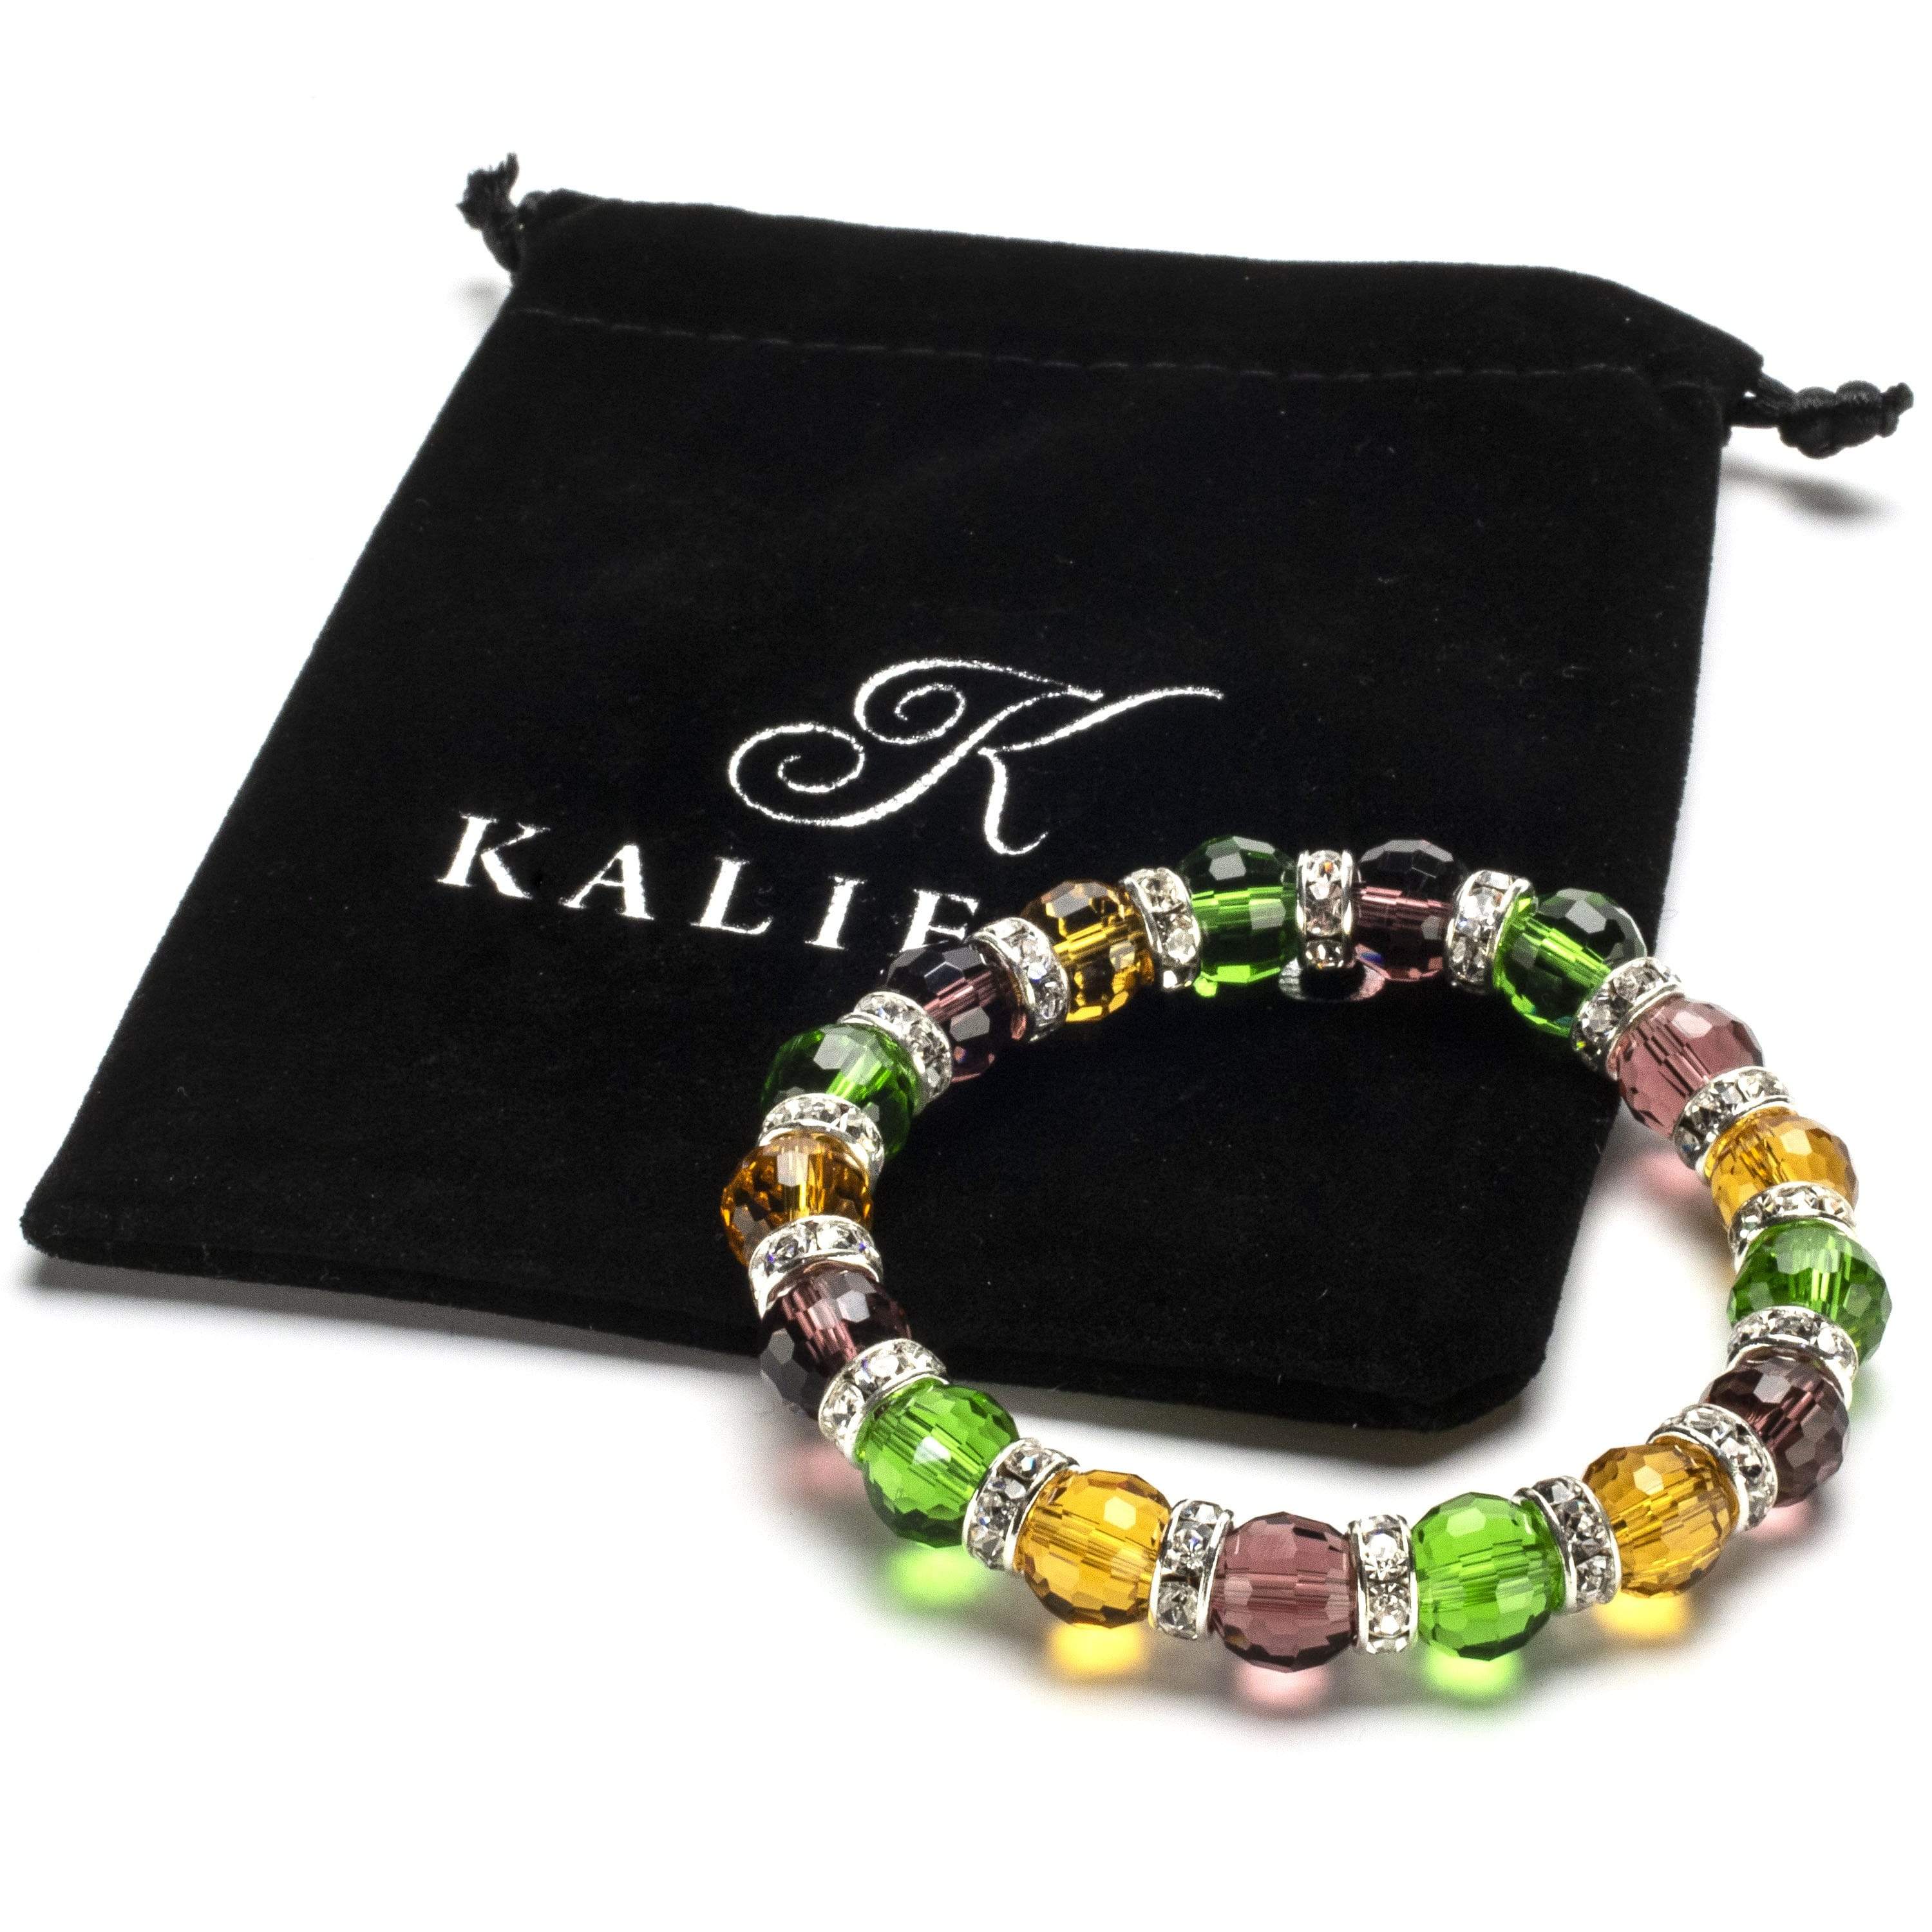 Kalifano Gorgeous Glass Jewelry Multicolored Gorgeous Glass Bracelet with Cubic Zirconia Crystals BLUE-BGG-N04